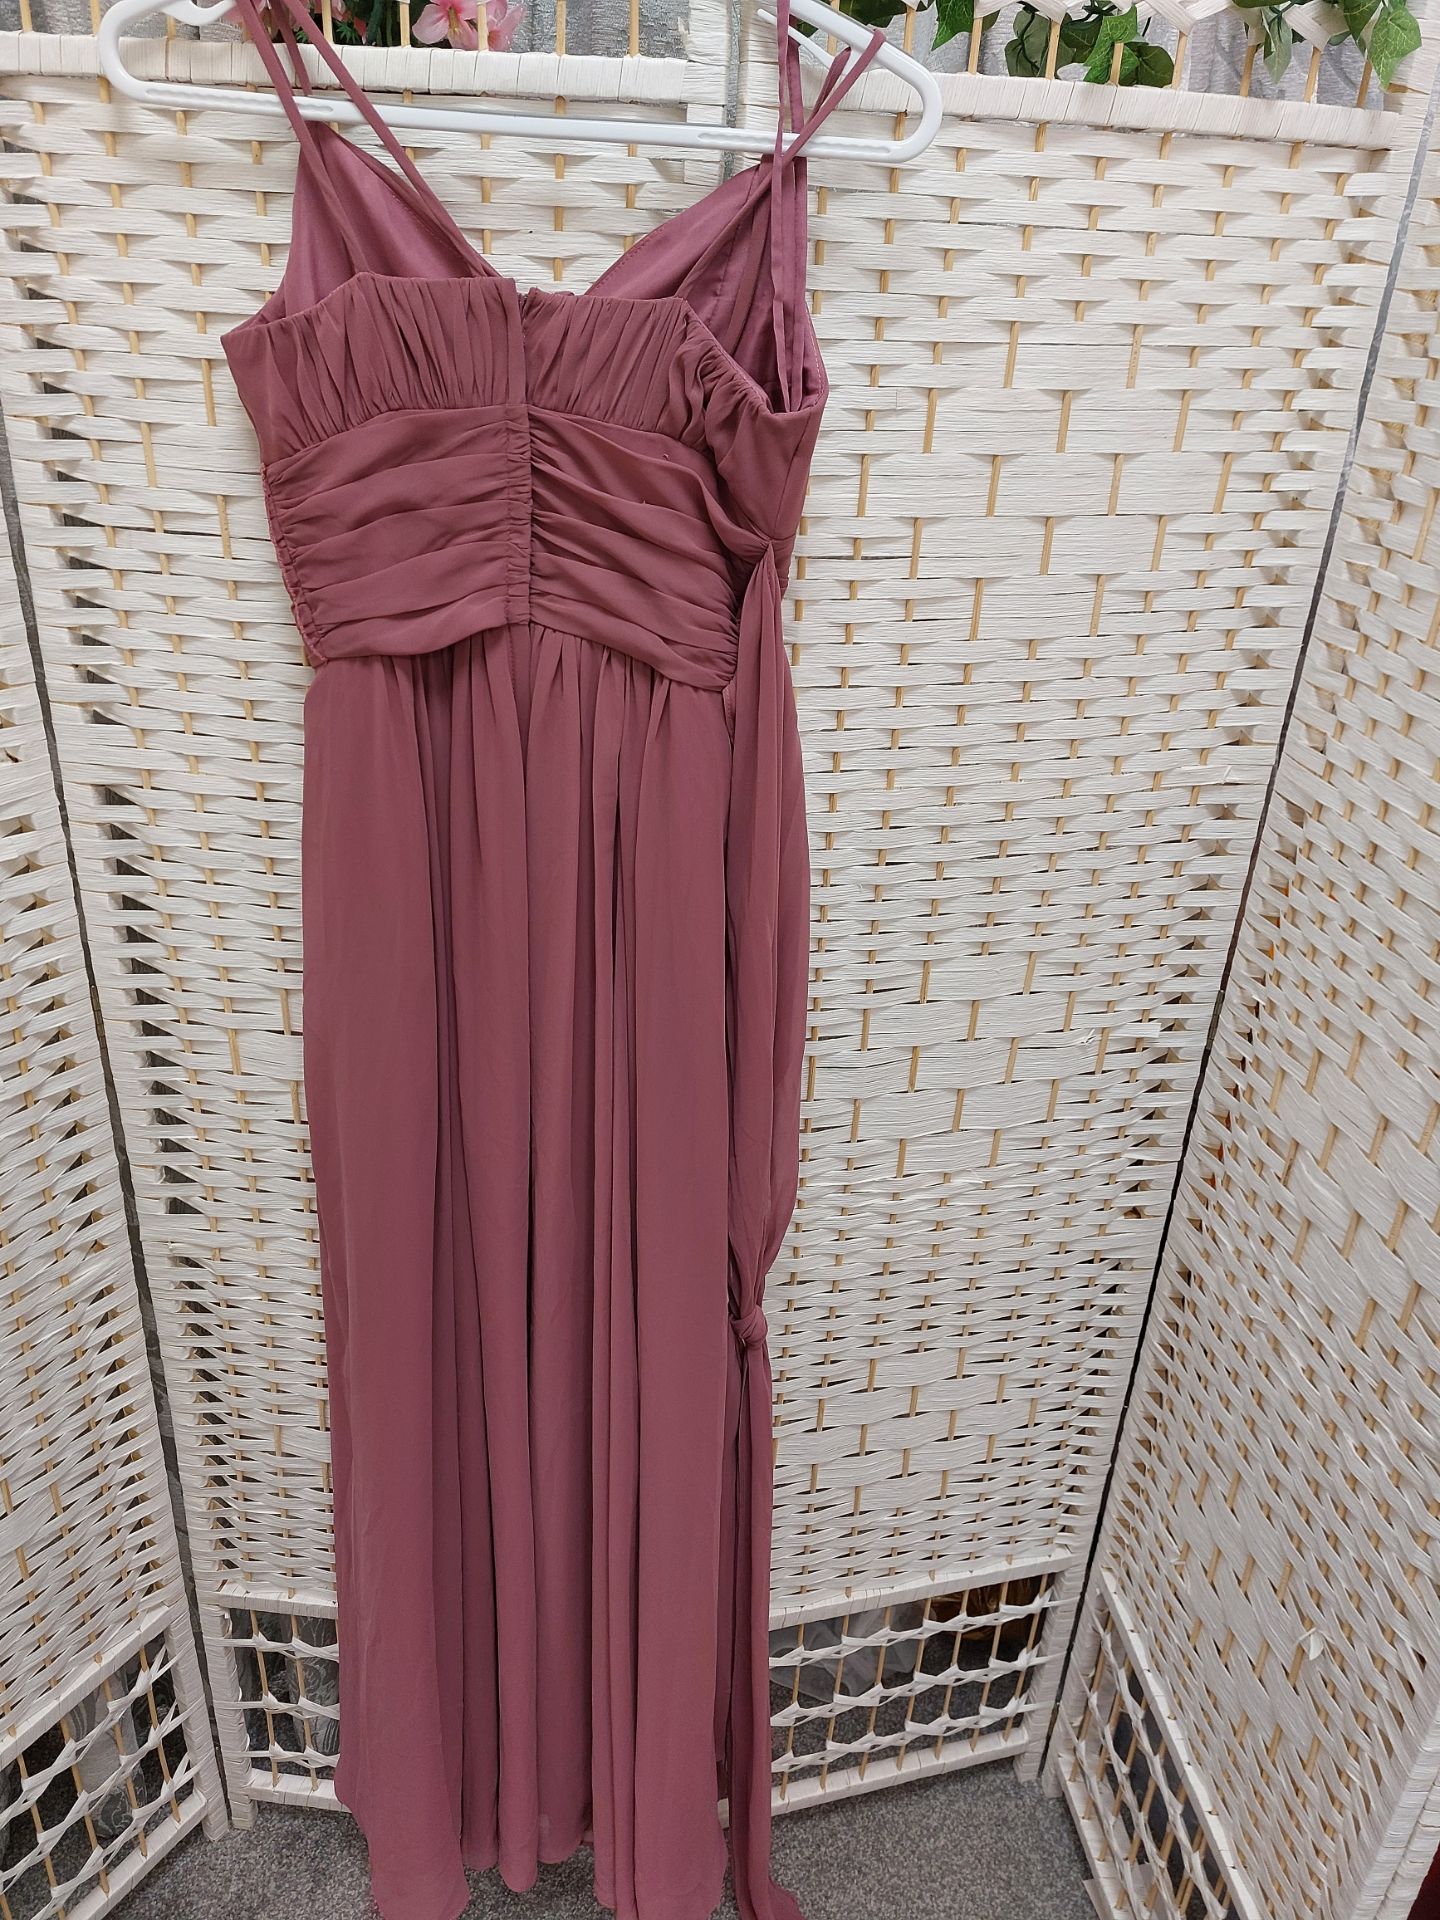 Alexia Prom Dress Child Approx. 10-12 Deep Rose